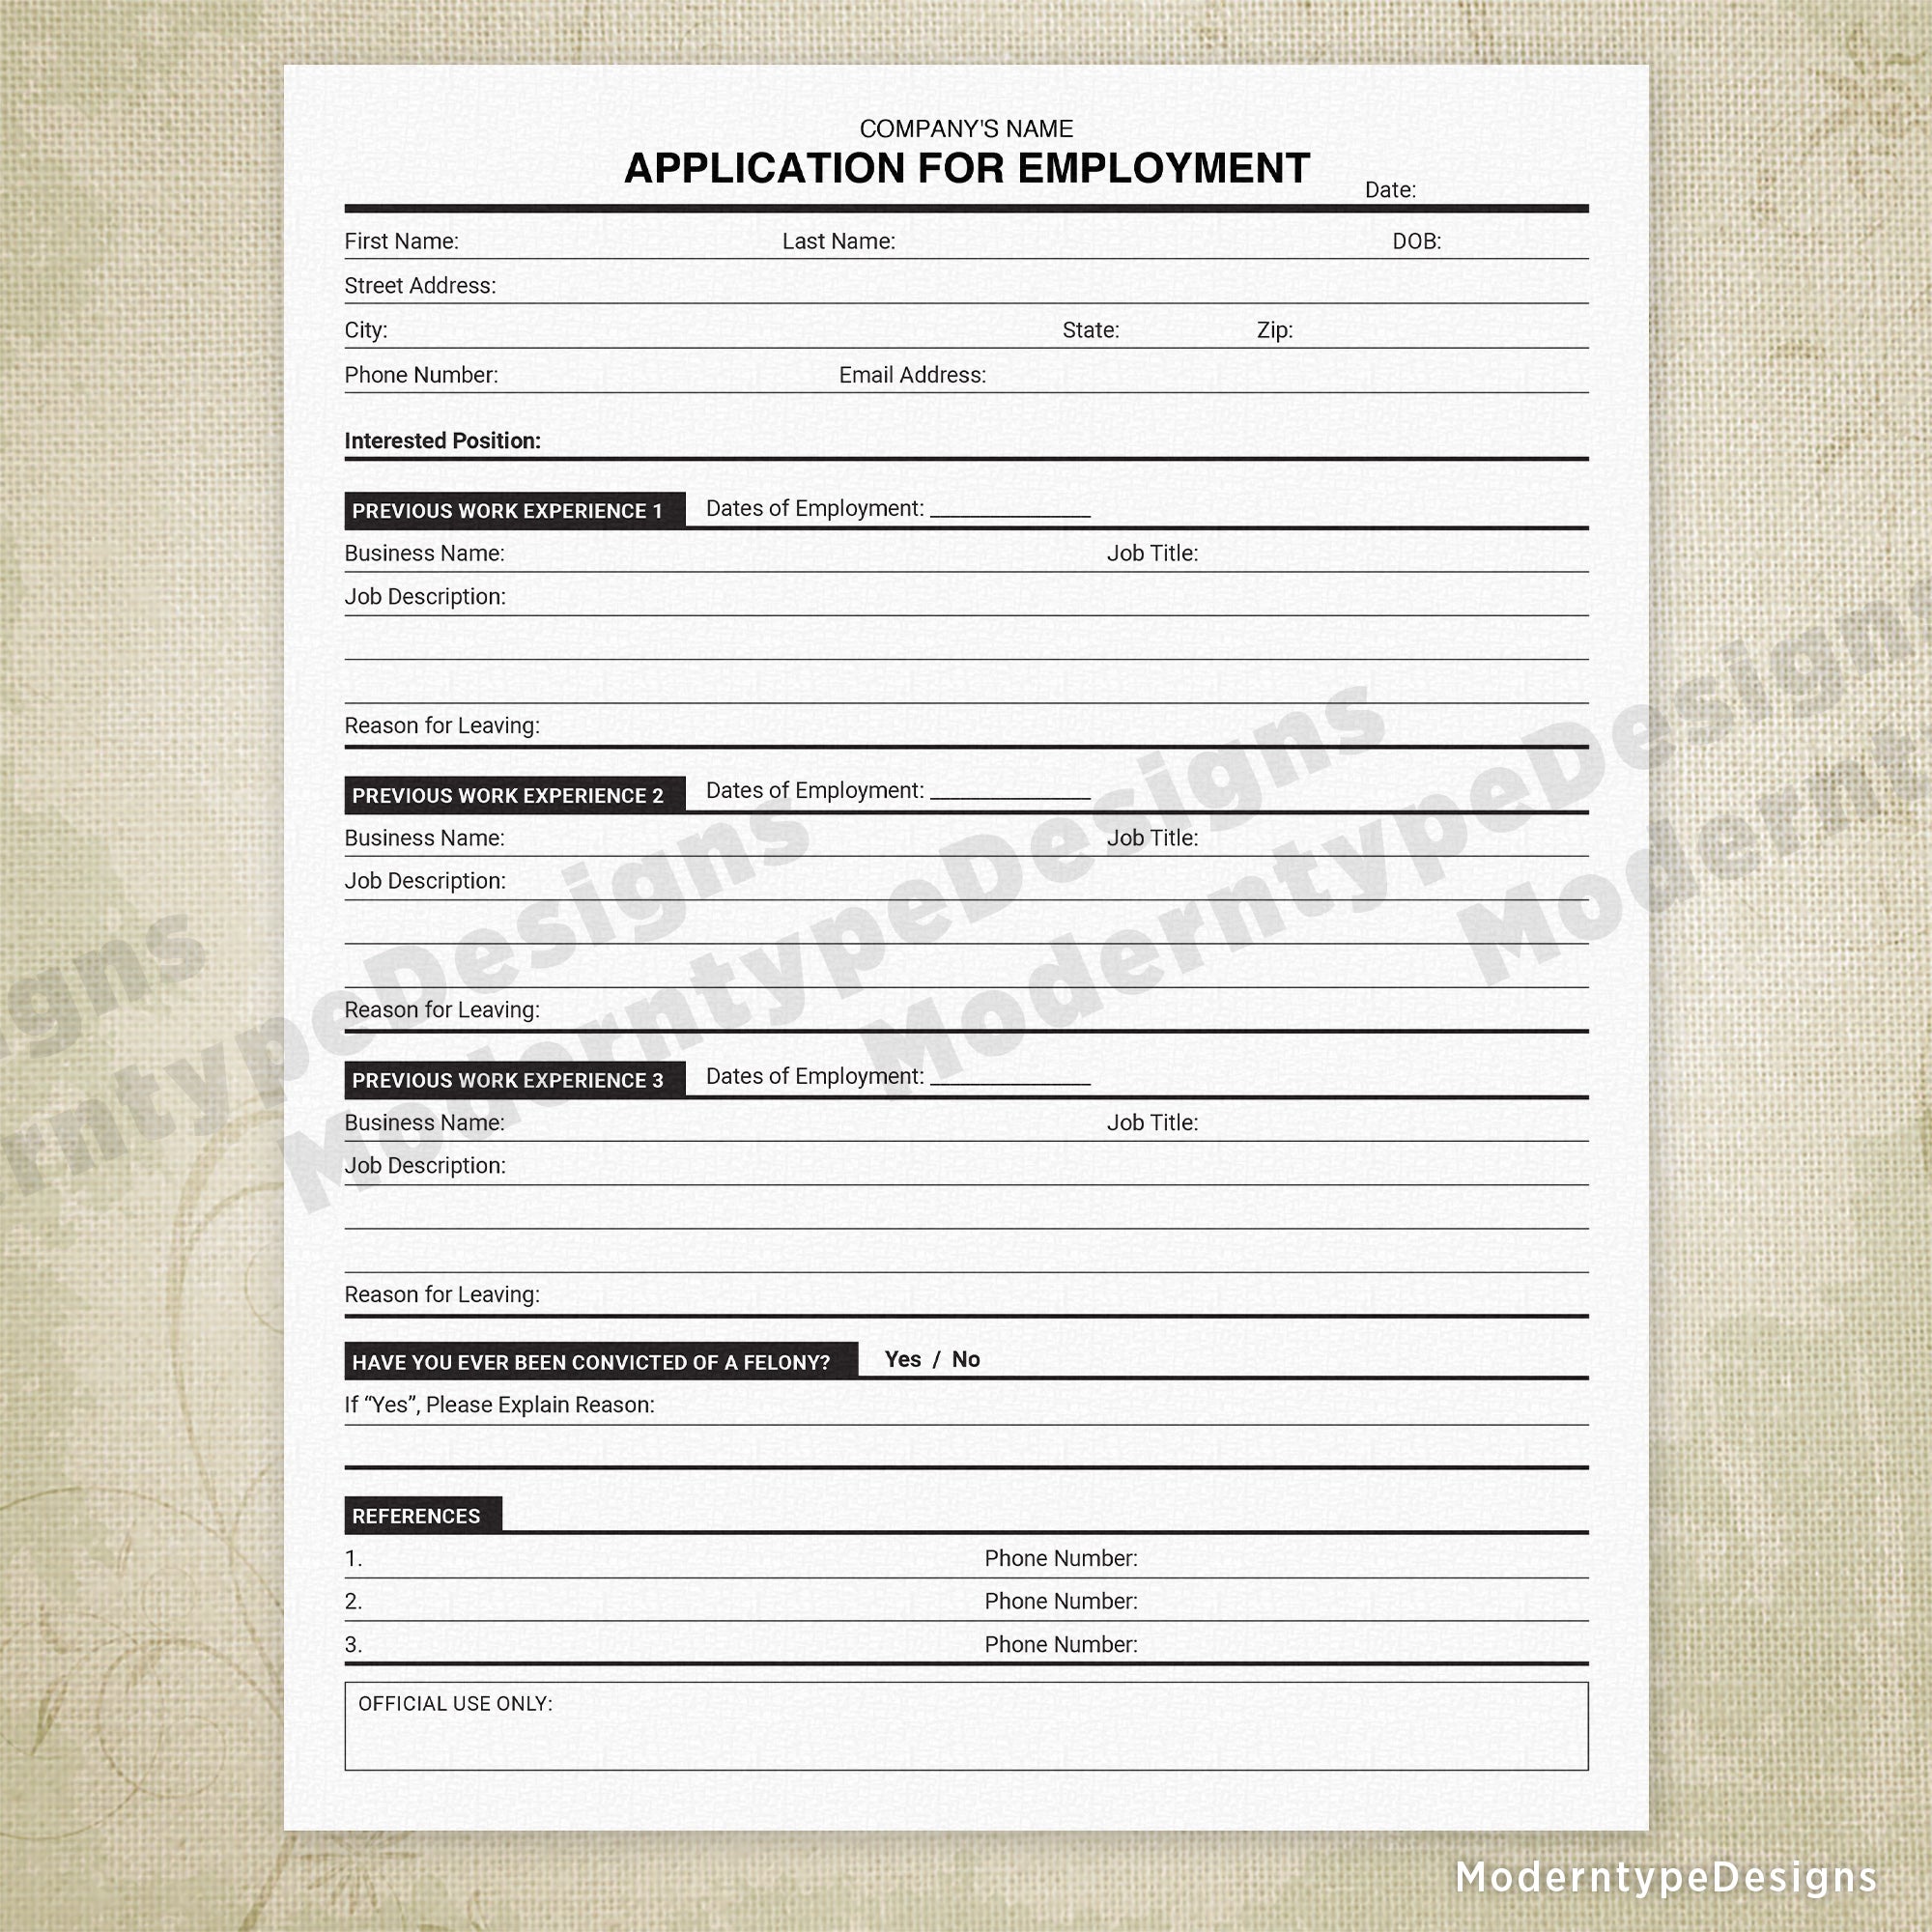 Application for Employment Printable, Personalized